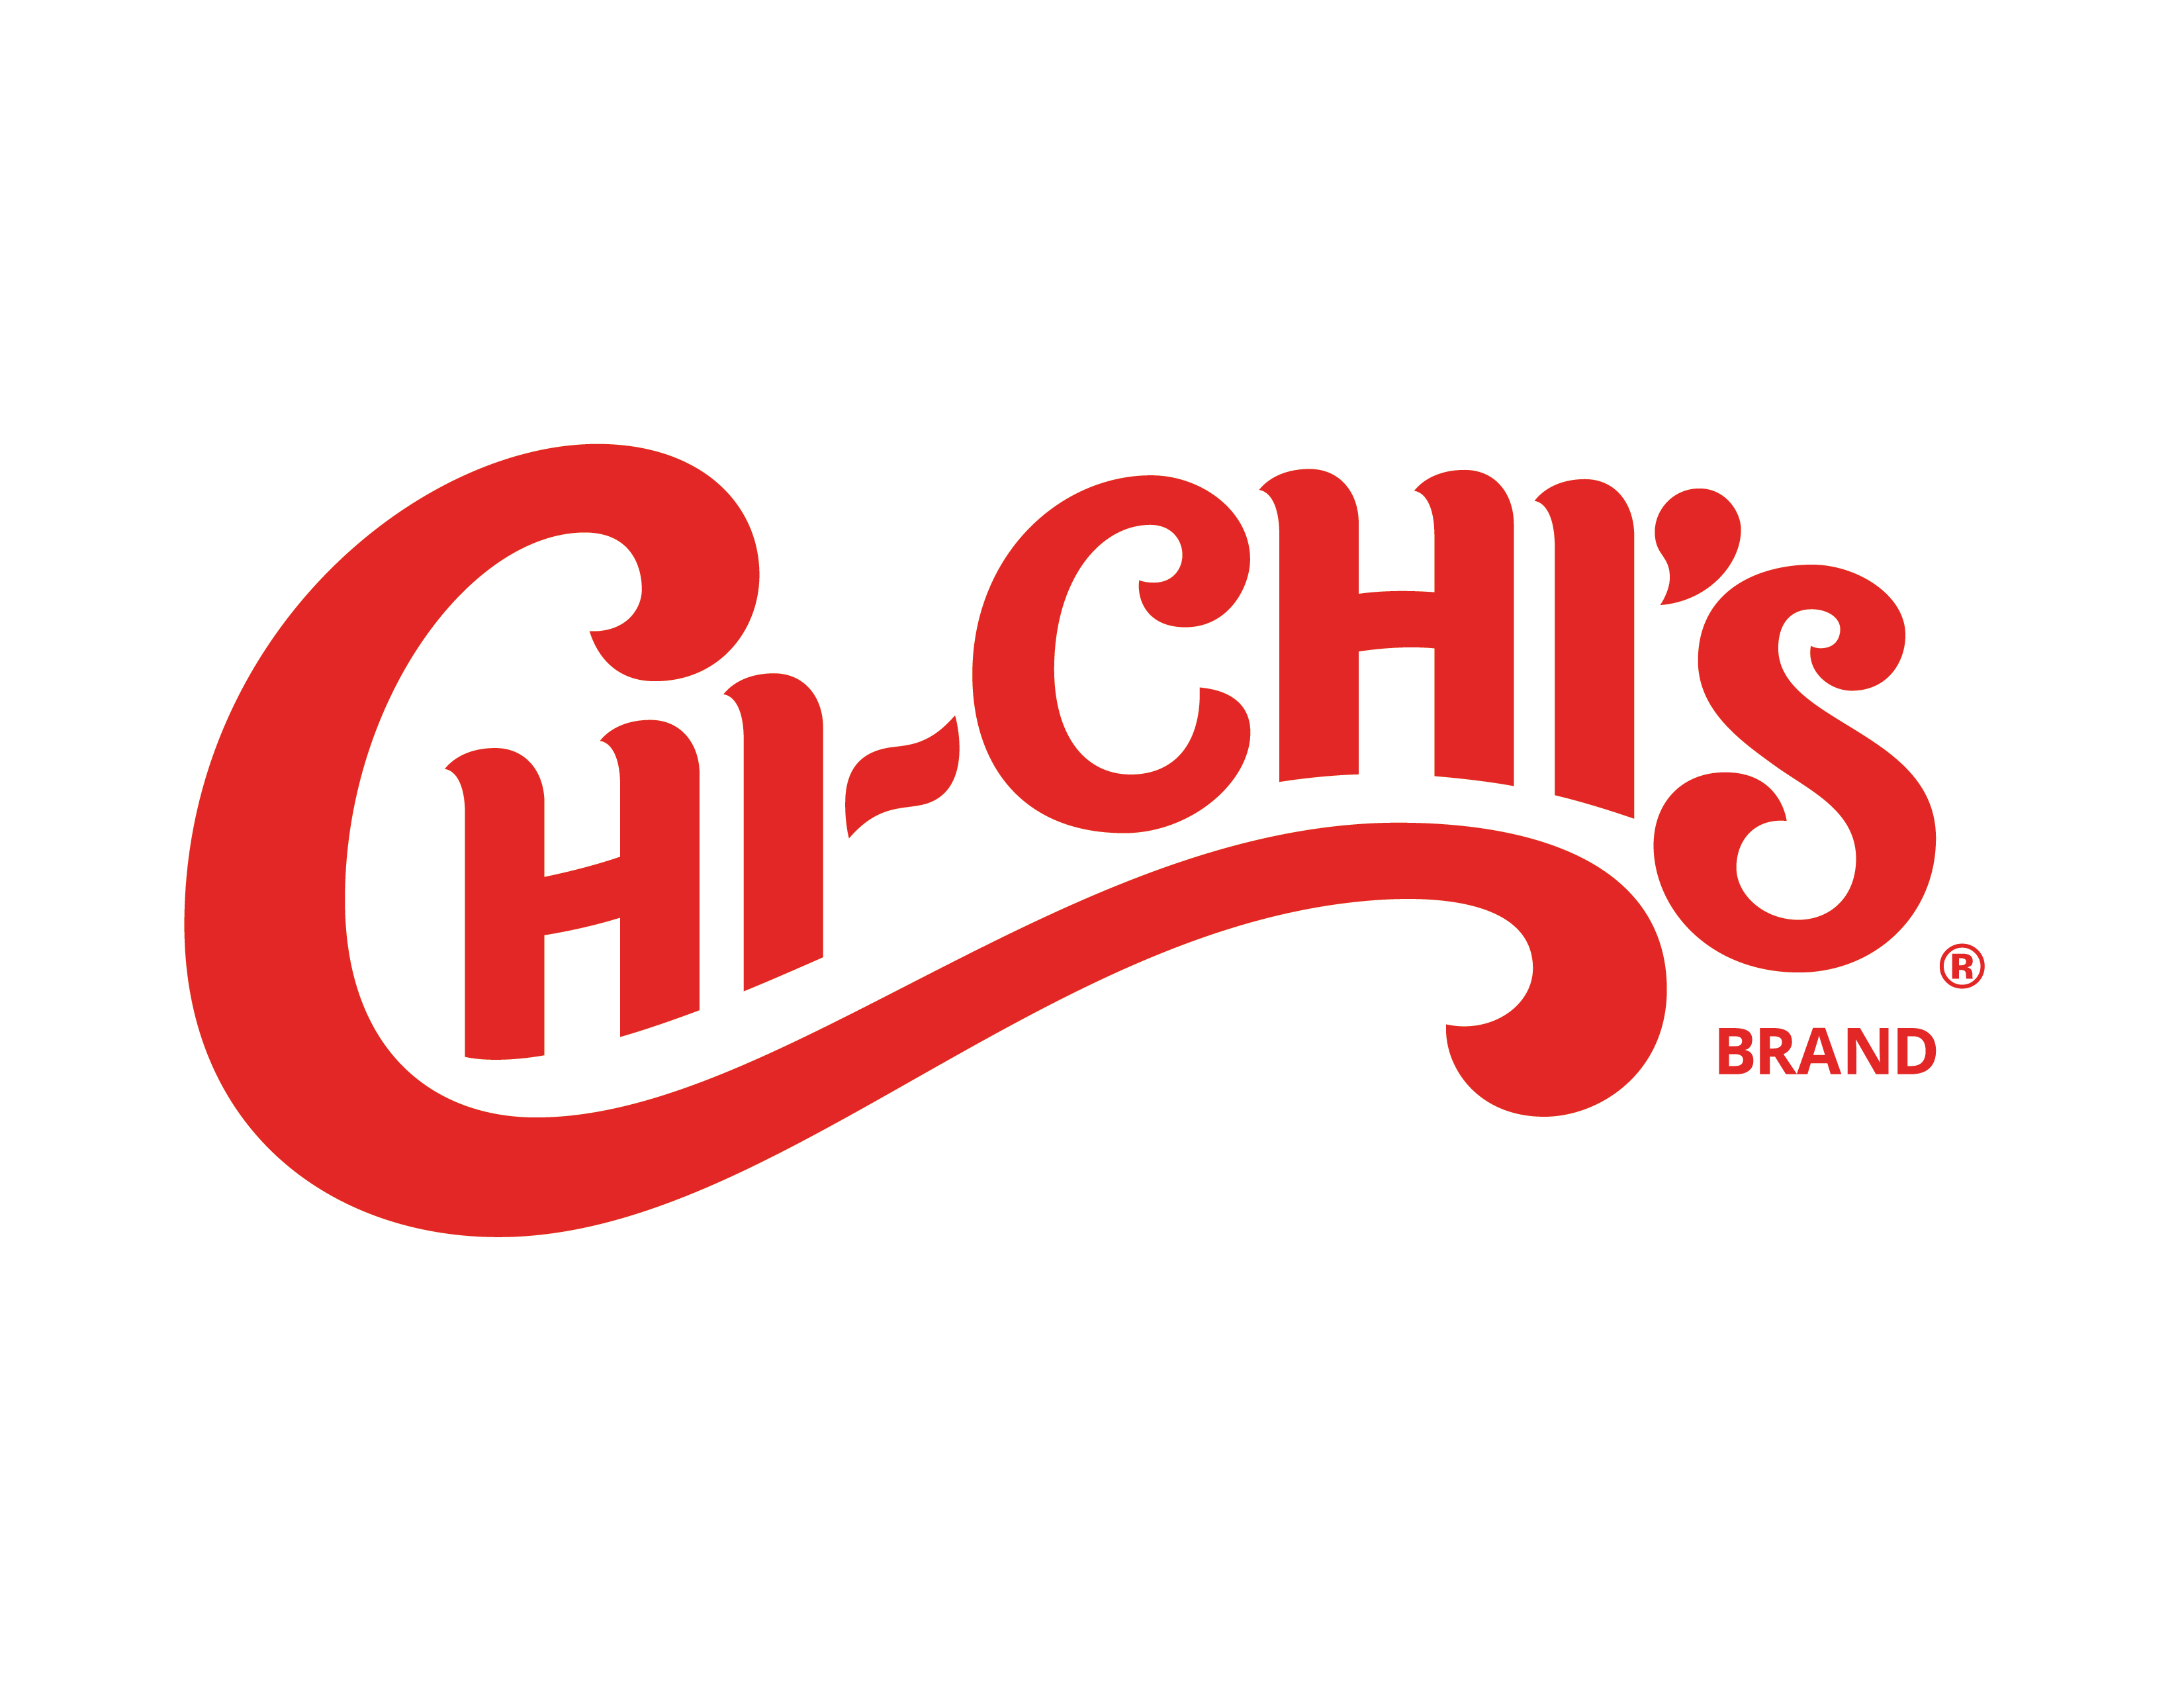 Chi Chis